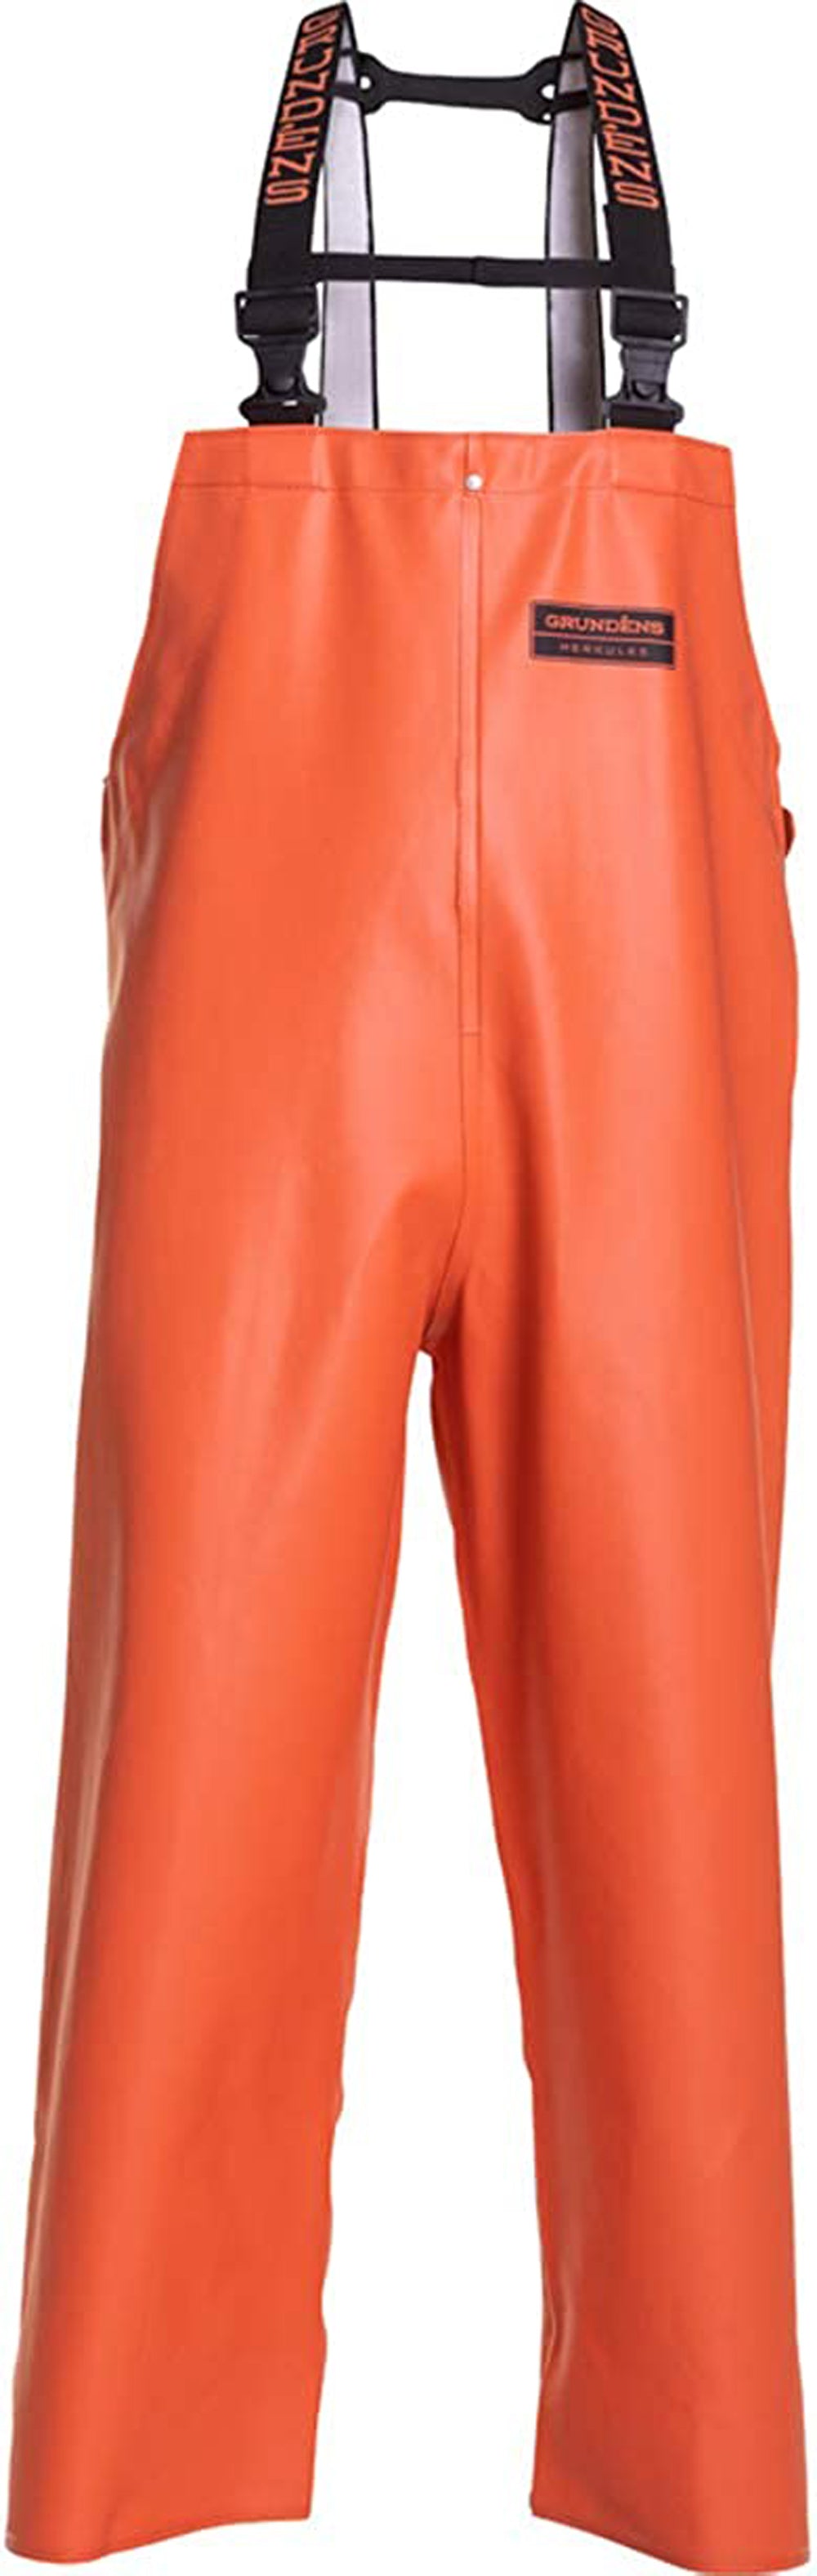 Herkules Tall 16 Bib Pant in Orange color from the front view